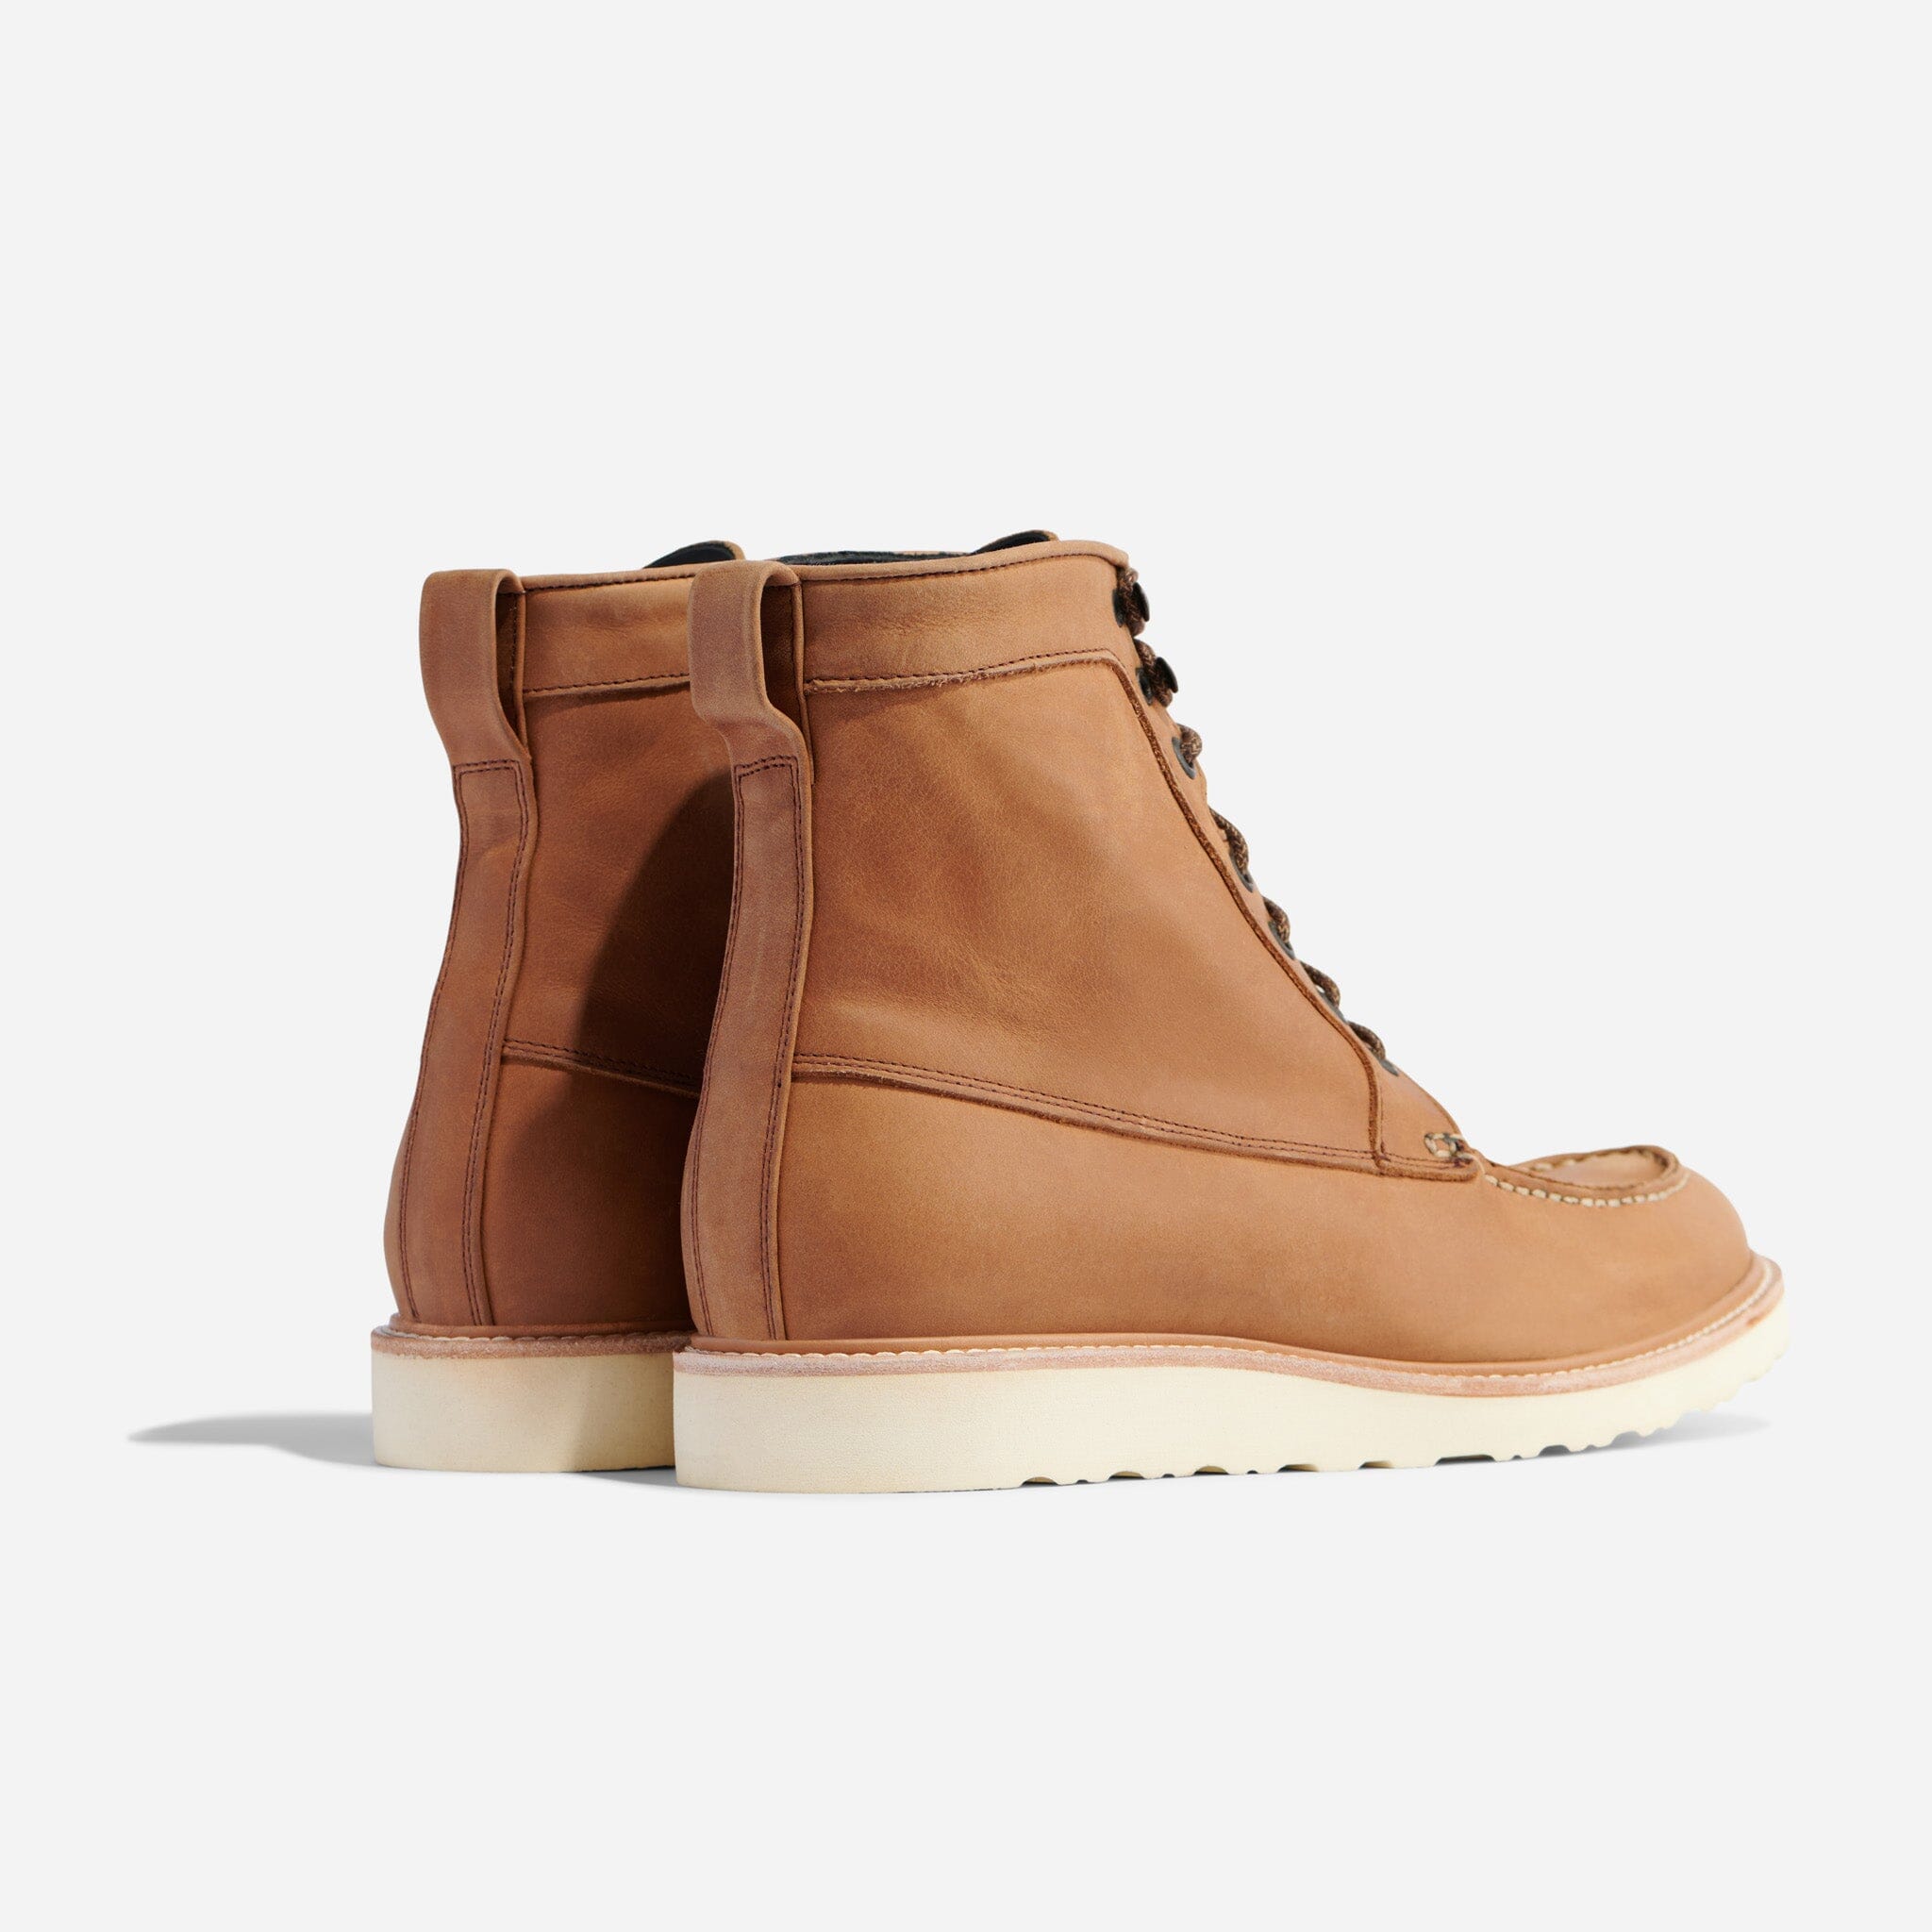 All-Weather Mateo Boot Tobacco